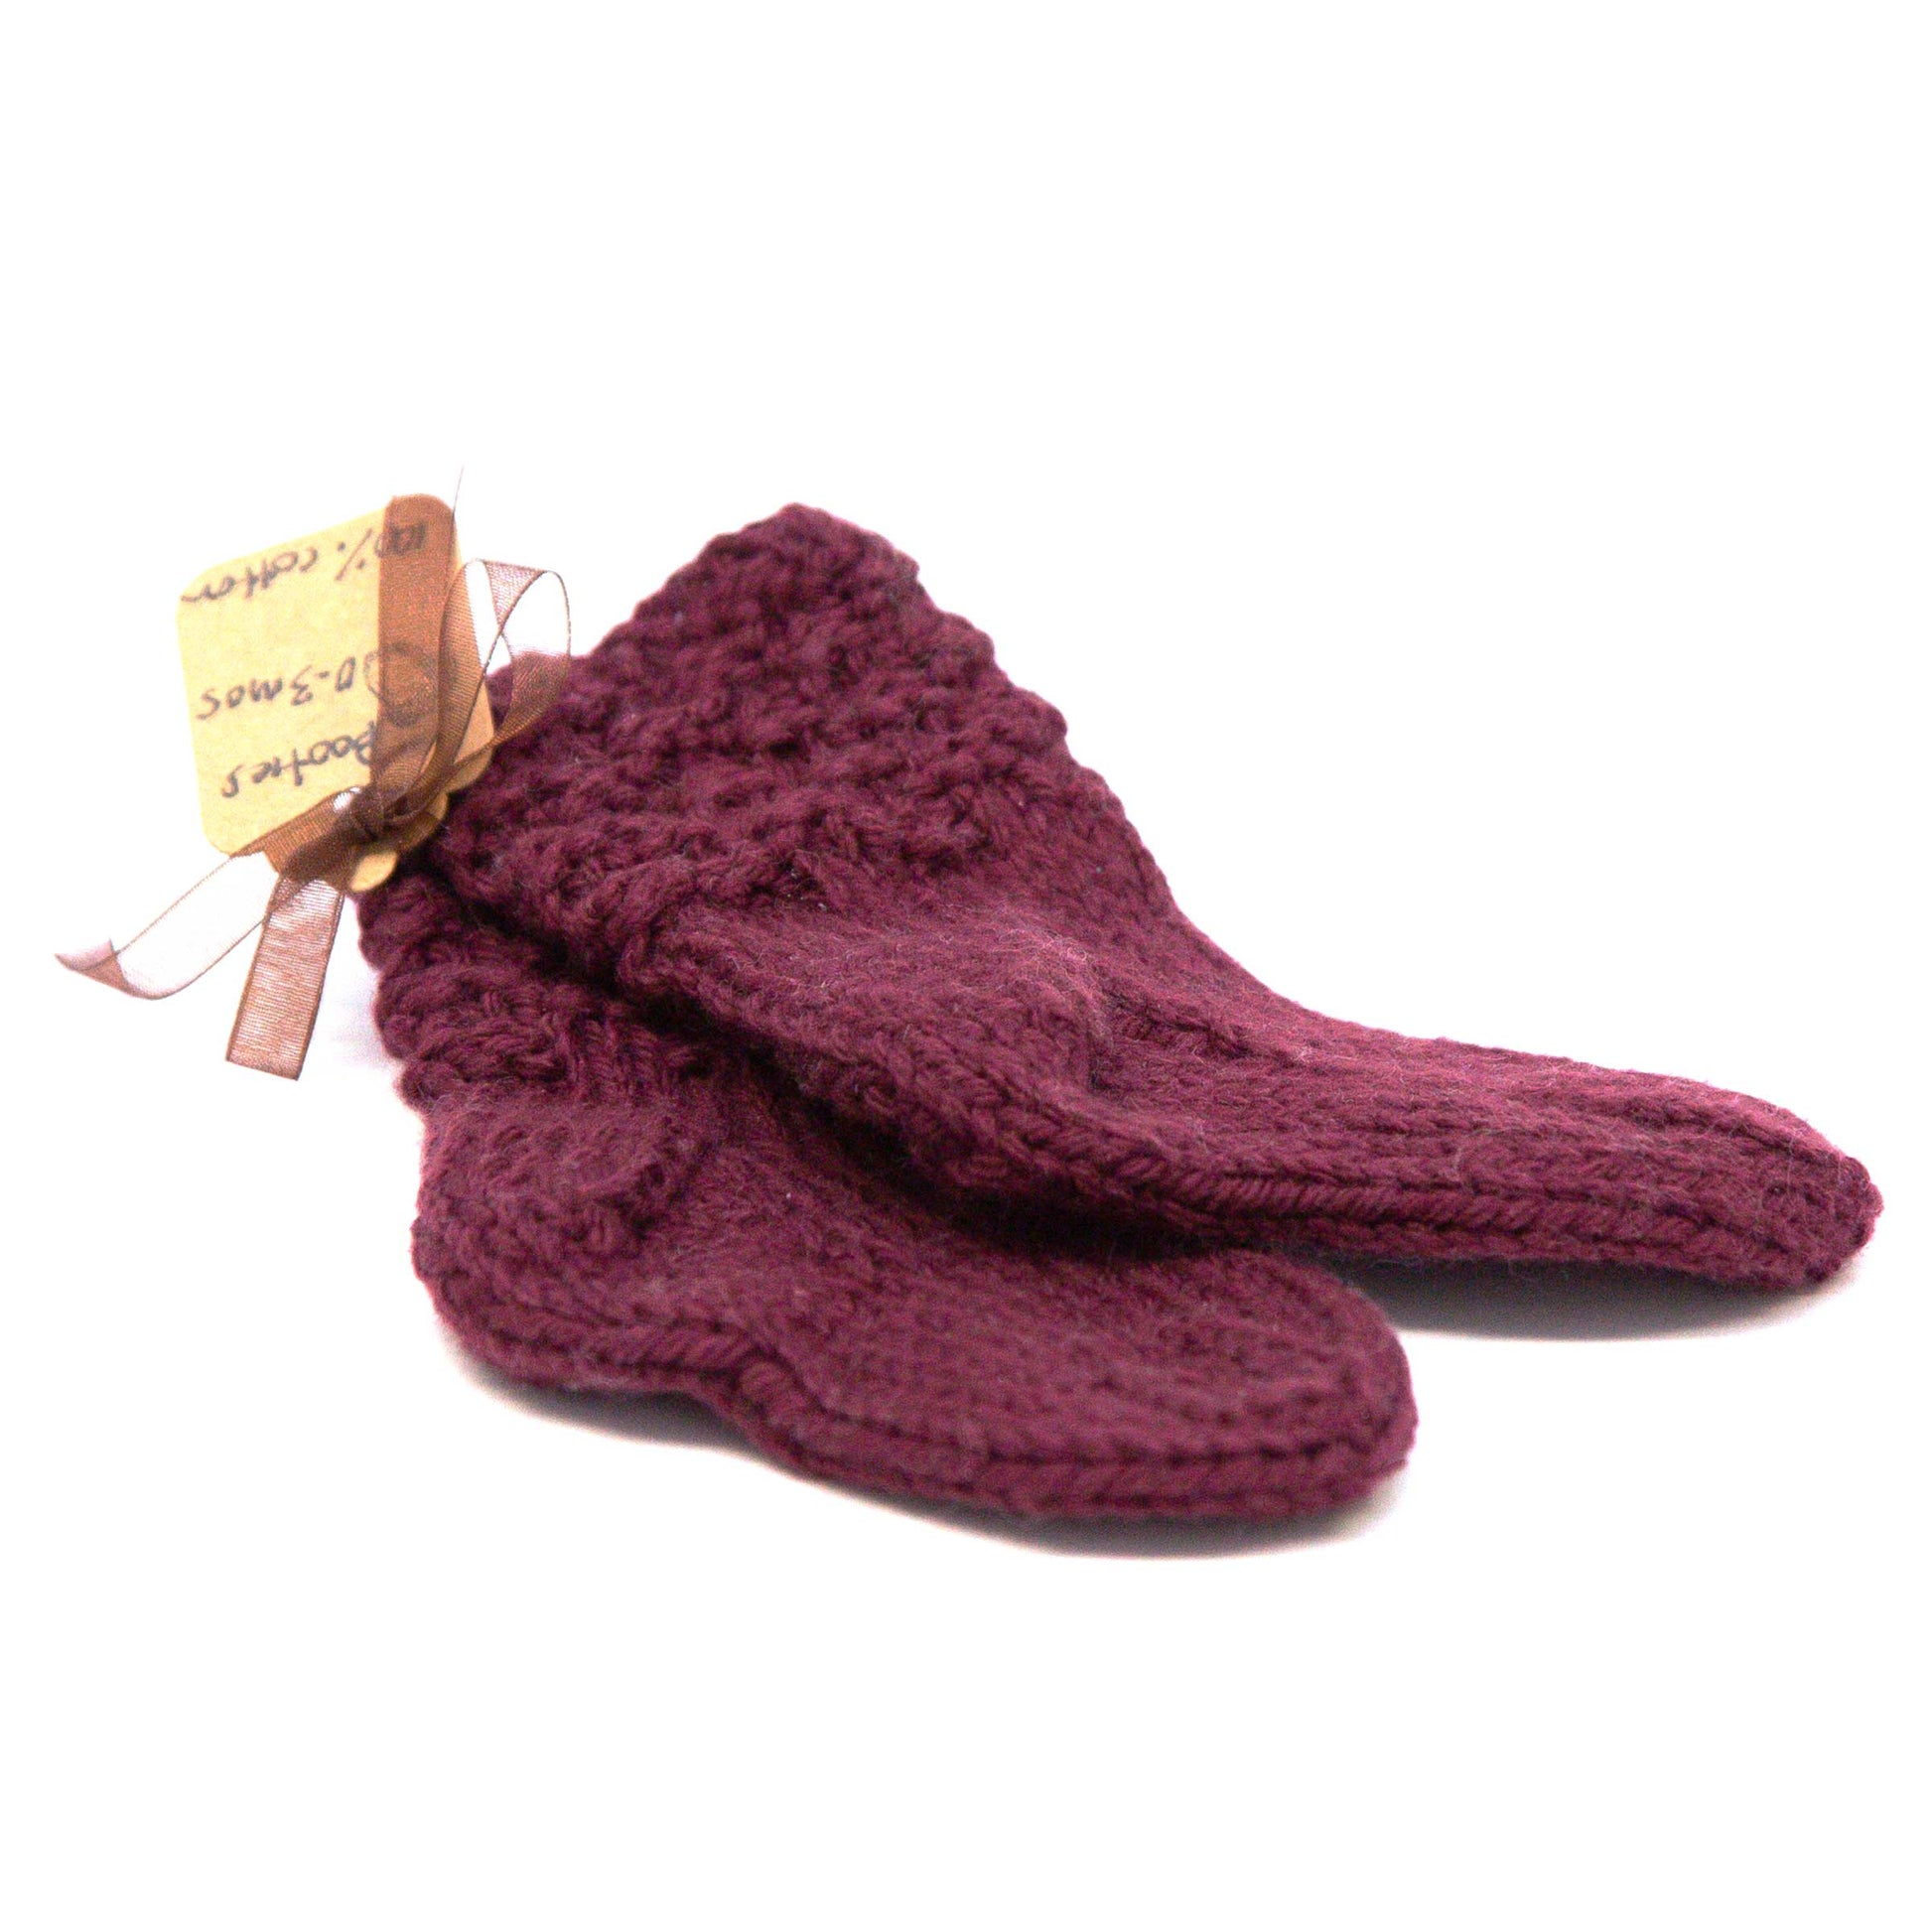 Baby Booties, 0-3 months, Hand Knit, Cotton, No Seam, Washable, Burgundy